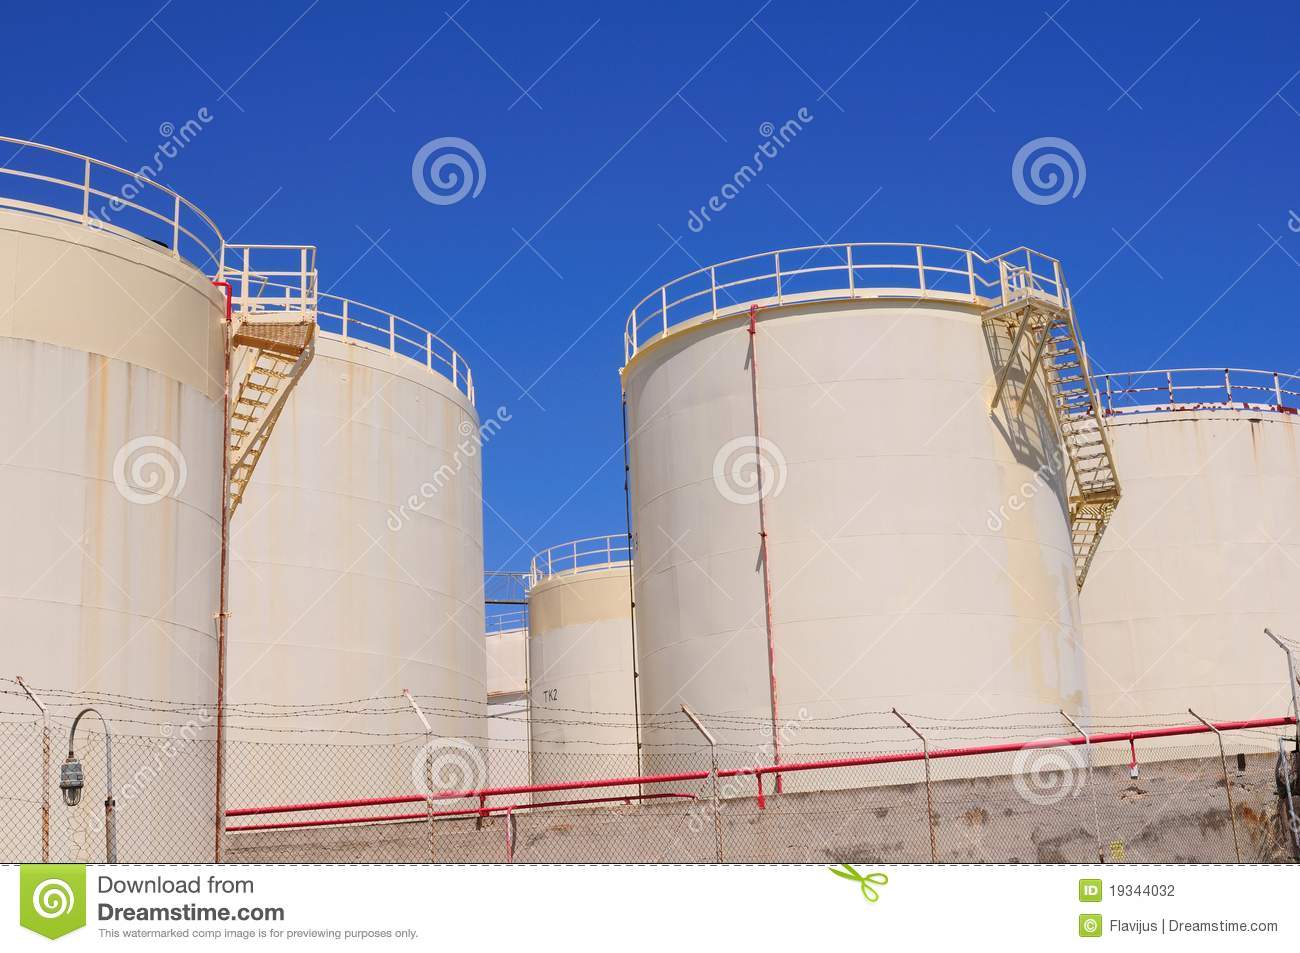 Oil And Gas Industry  Oil Reservoirs On A Petrochemical Plant